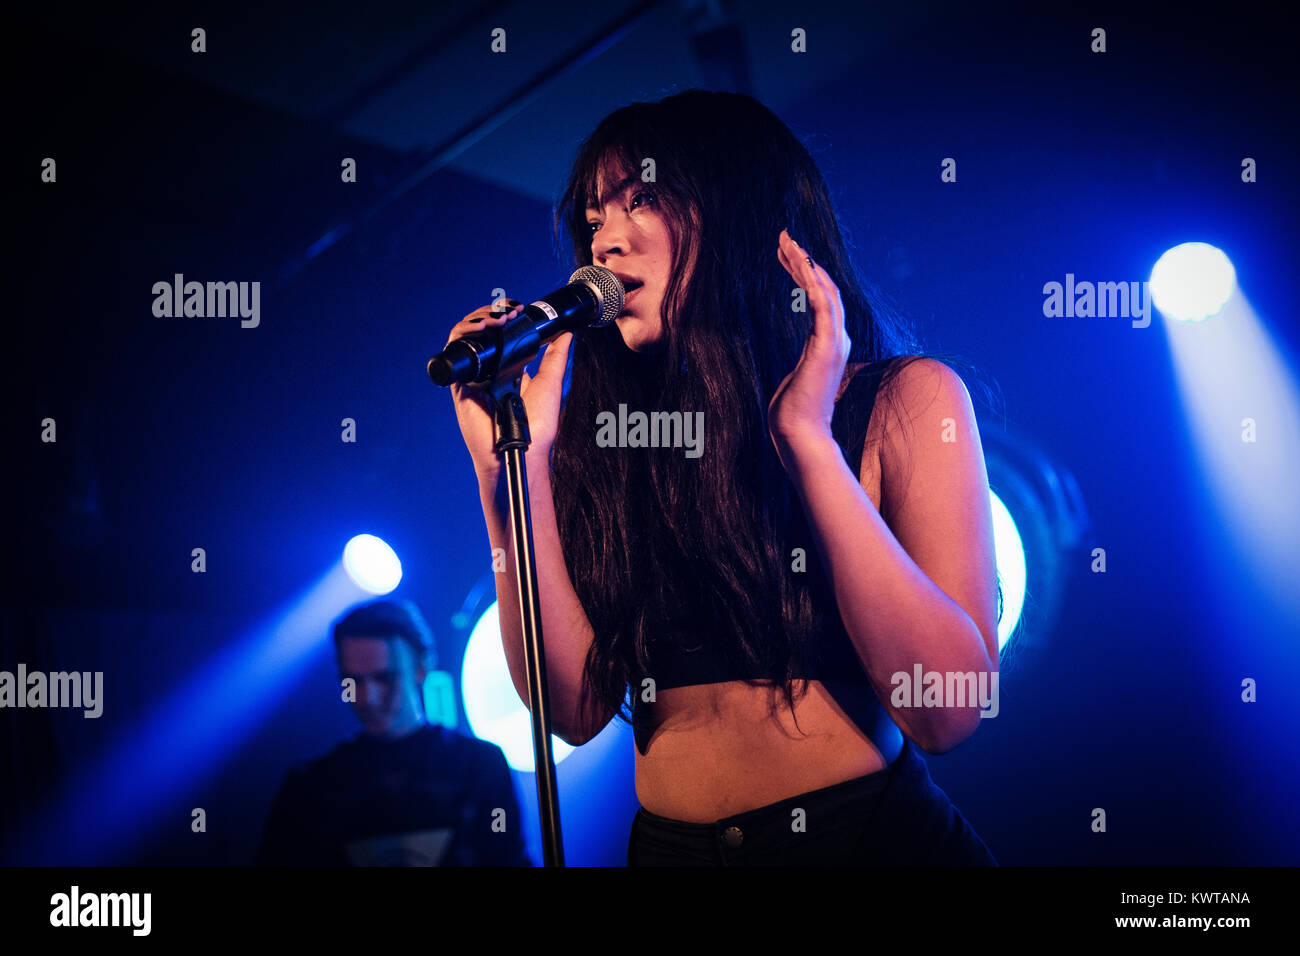 The Danish-Zambian R&B and electro pop singer Kwamie Liv performs a live concert at P6 BEAT Rocker in Koncerthuset in Copenhagen. Kwamie Liv is among the most exciting new talents in Denmark and is already a well-known artist abroad. Denmark, 21/12 2014. Stock Photo